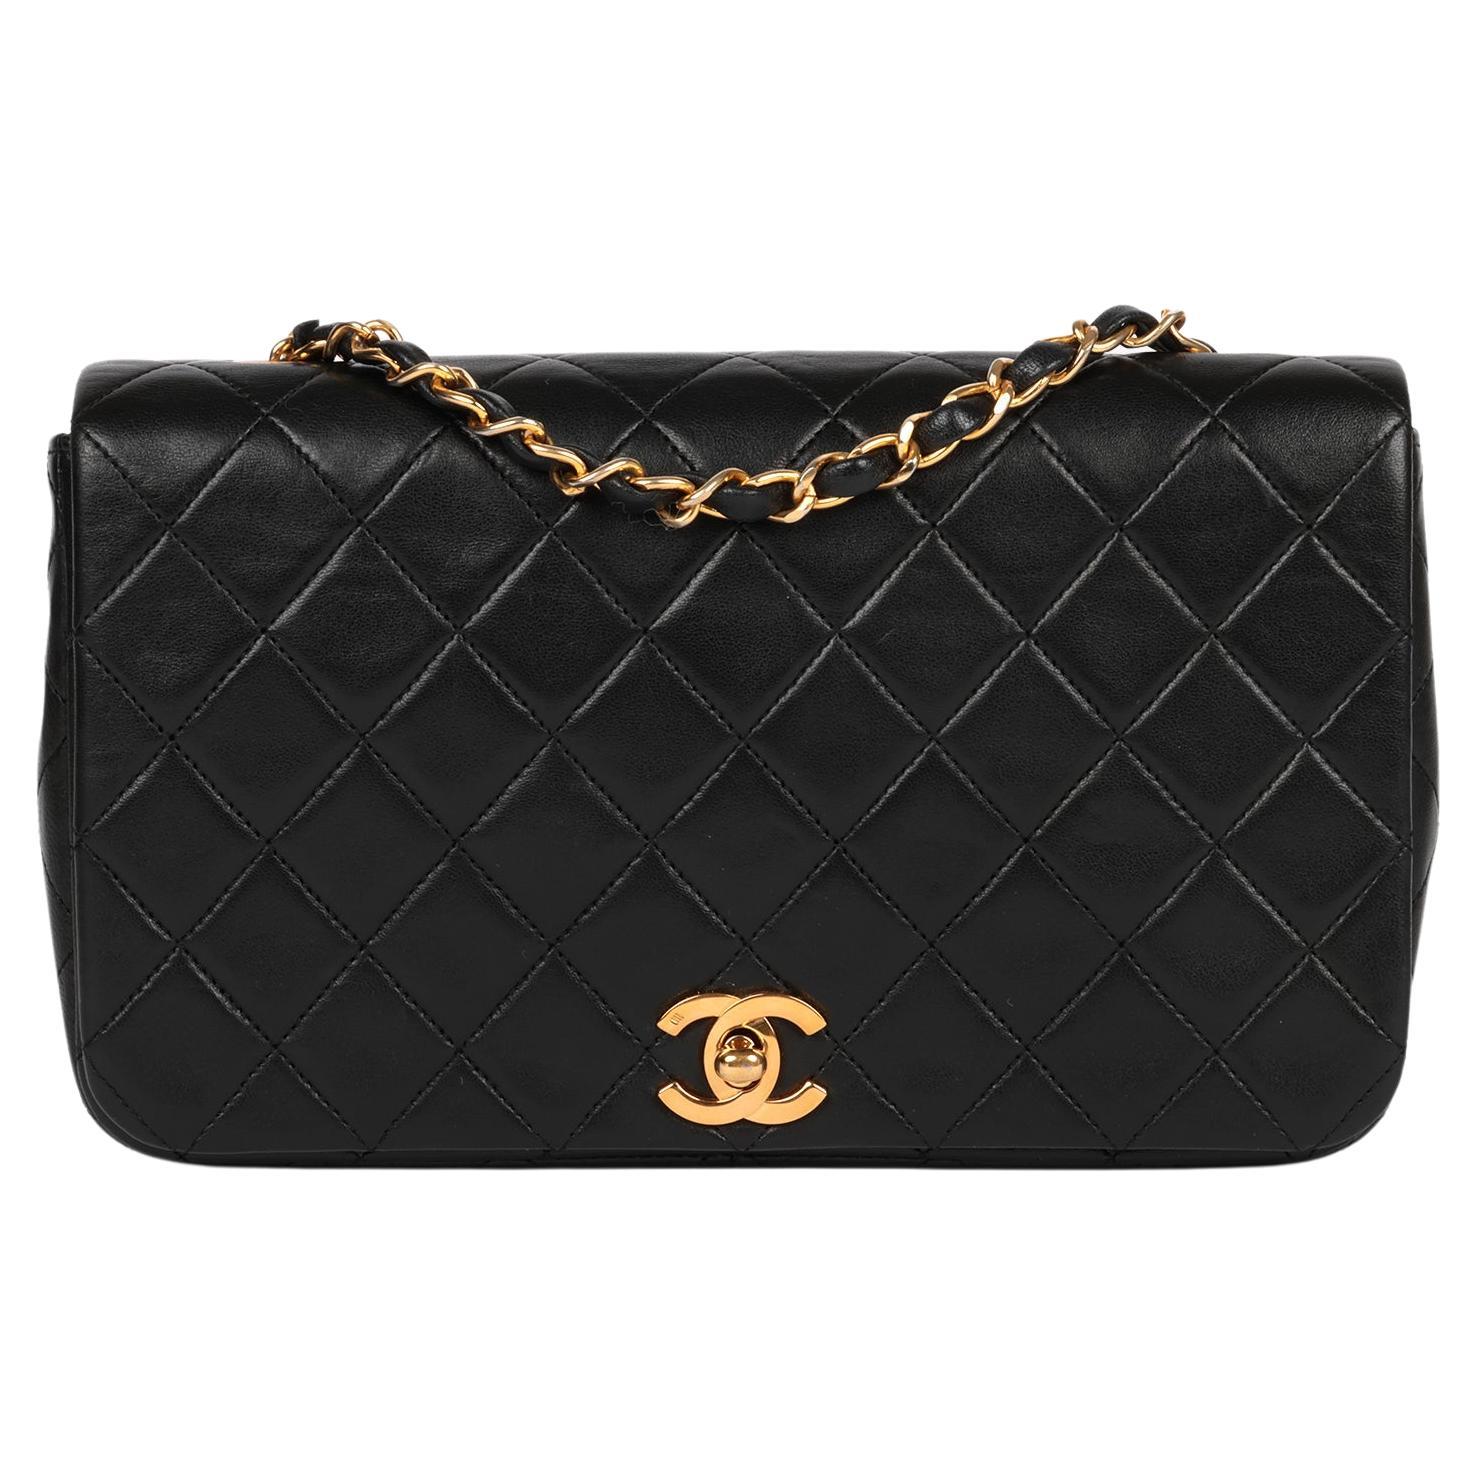 How much was a Chanel bag in the 1950s?